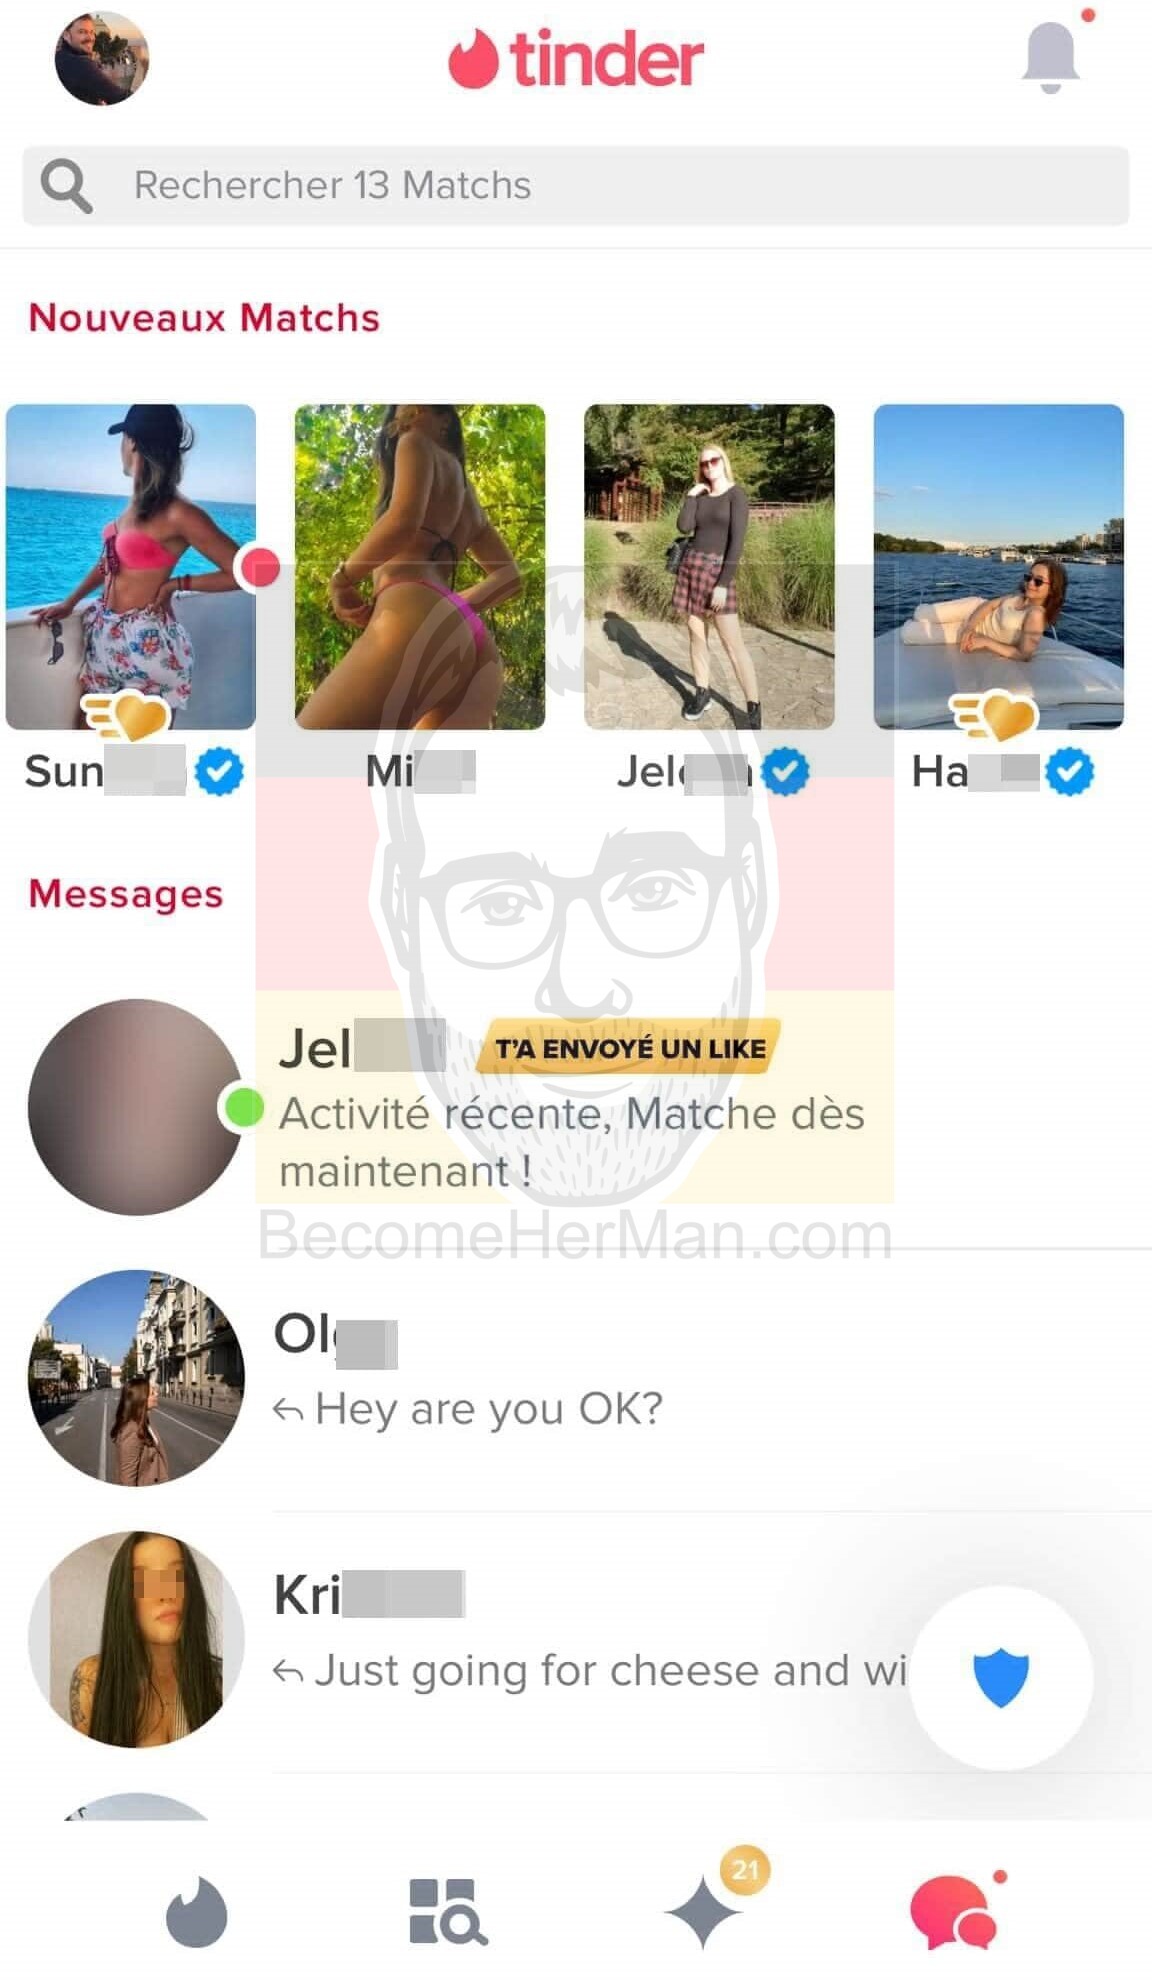 Results you can expect after applying the Tinder hacks